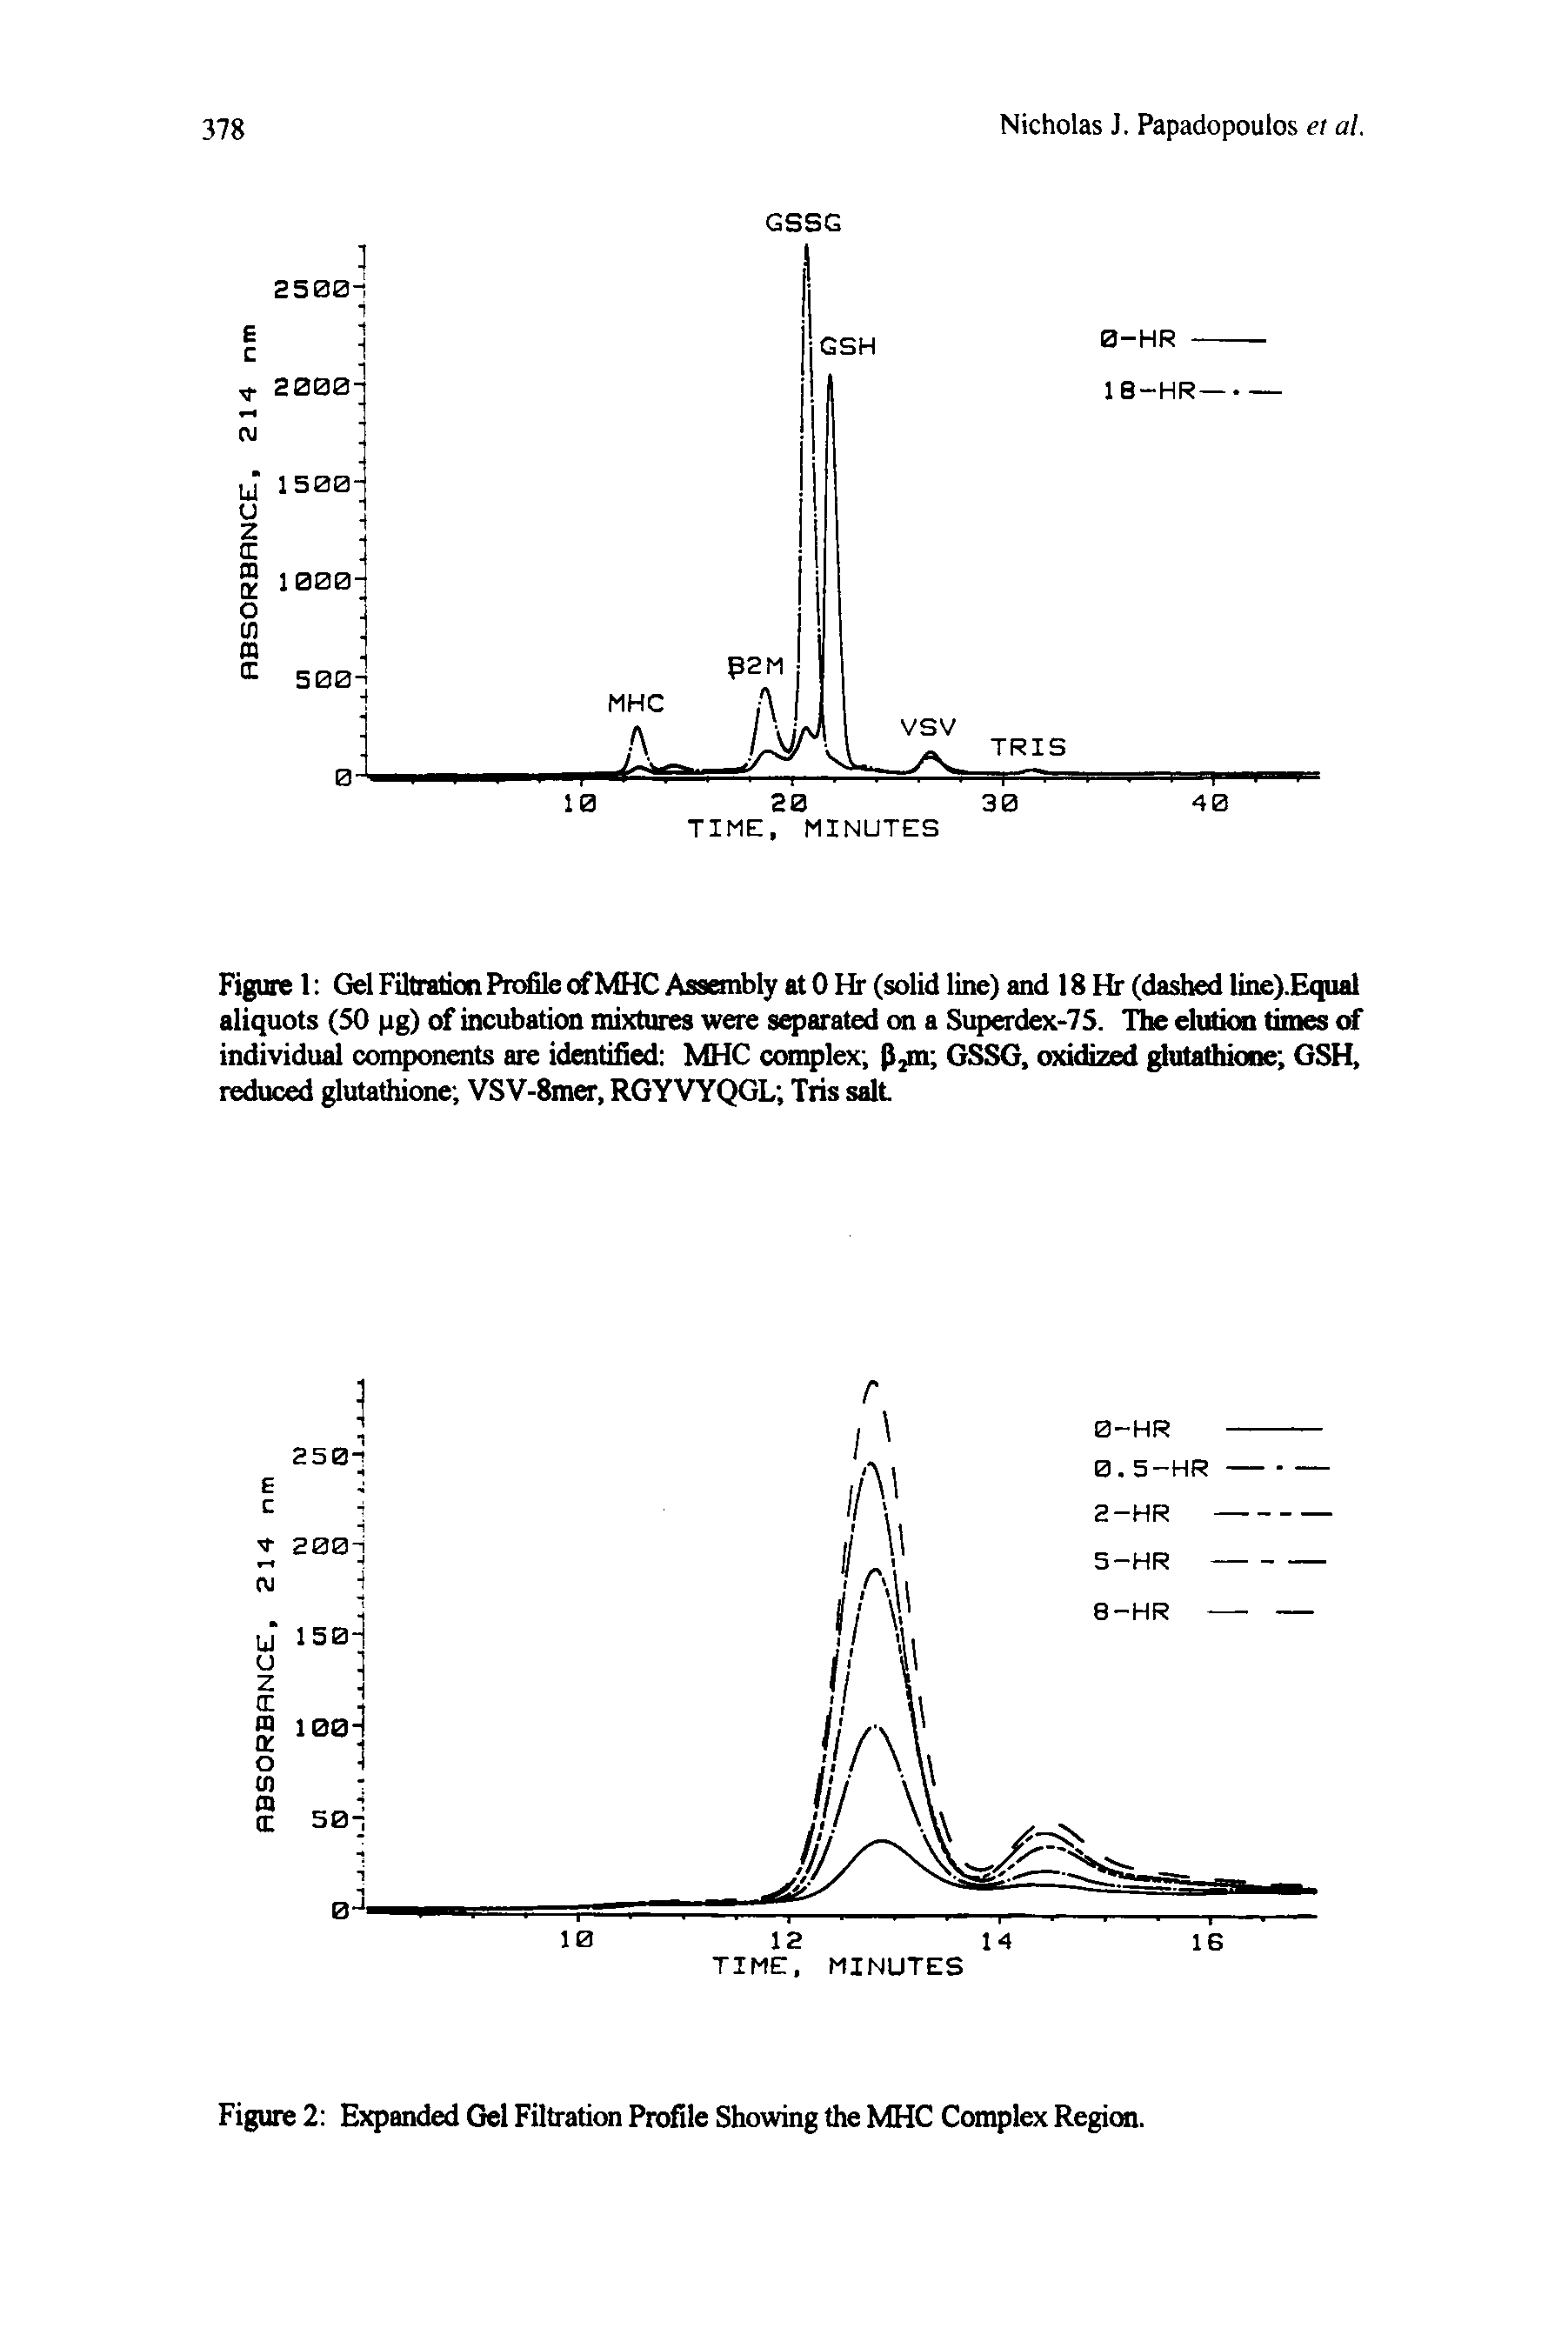 Figure 1 Gel Filtration Prc e ( MHC Assonbly at 0 Hr (solid line) and 18 Hr (dashed line).Equal aliquots (50 pg) of incubation mixtures were separated on a Superdex-73. The elutkm times of individual components are identified MHC complex P,m GSSG, oxidized glutathione OSH, reduced glutathione VSV-8mer, RGYVYQGL Tris salt...